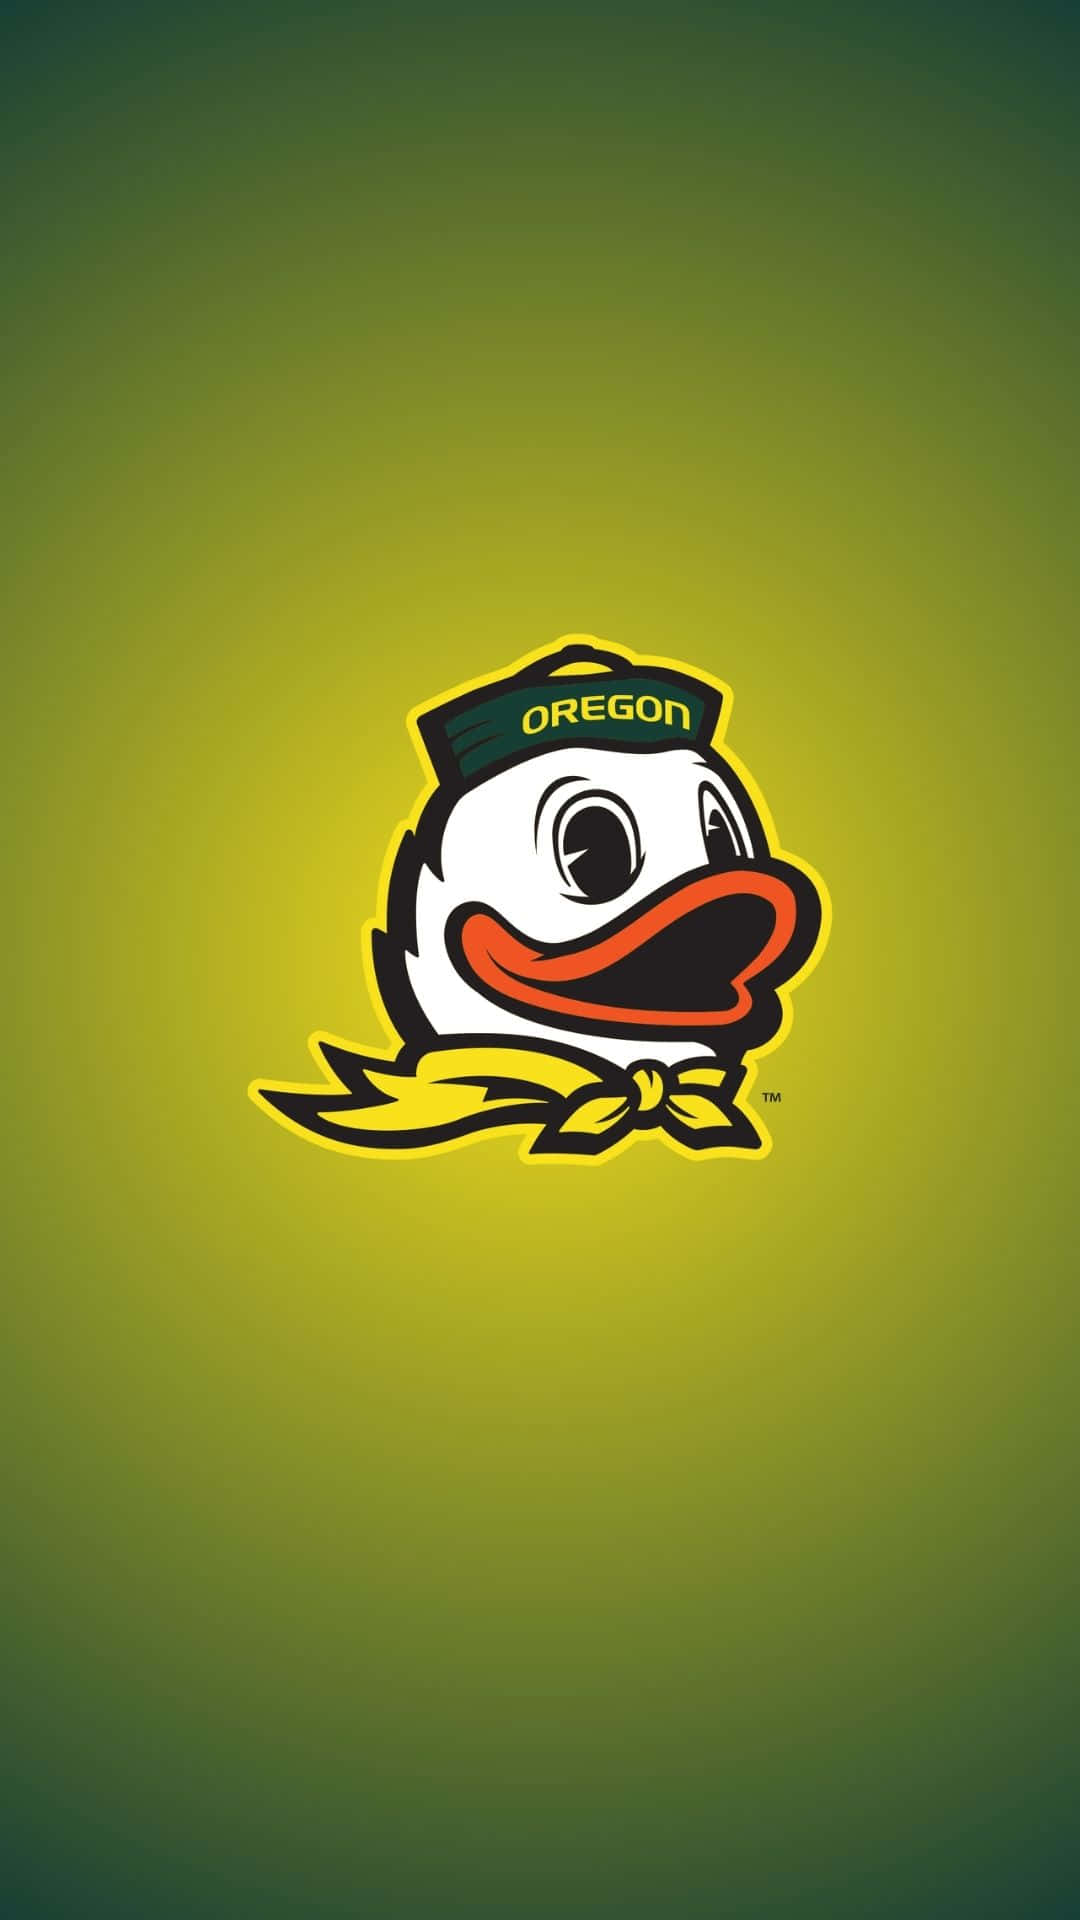 Exciting Oregon Ducks Football Game Moment Wallpaper